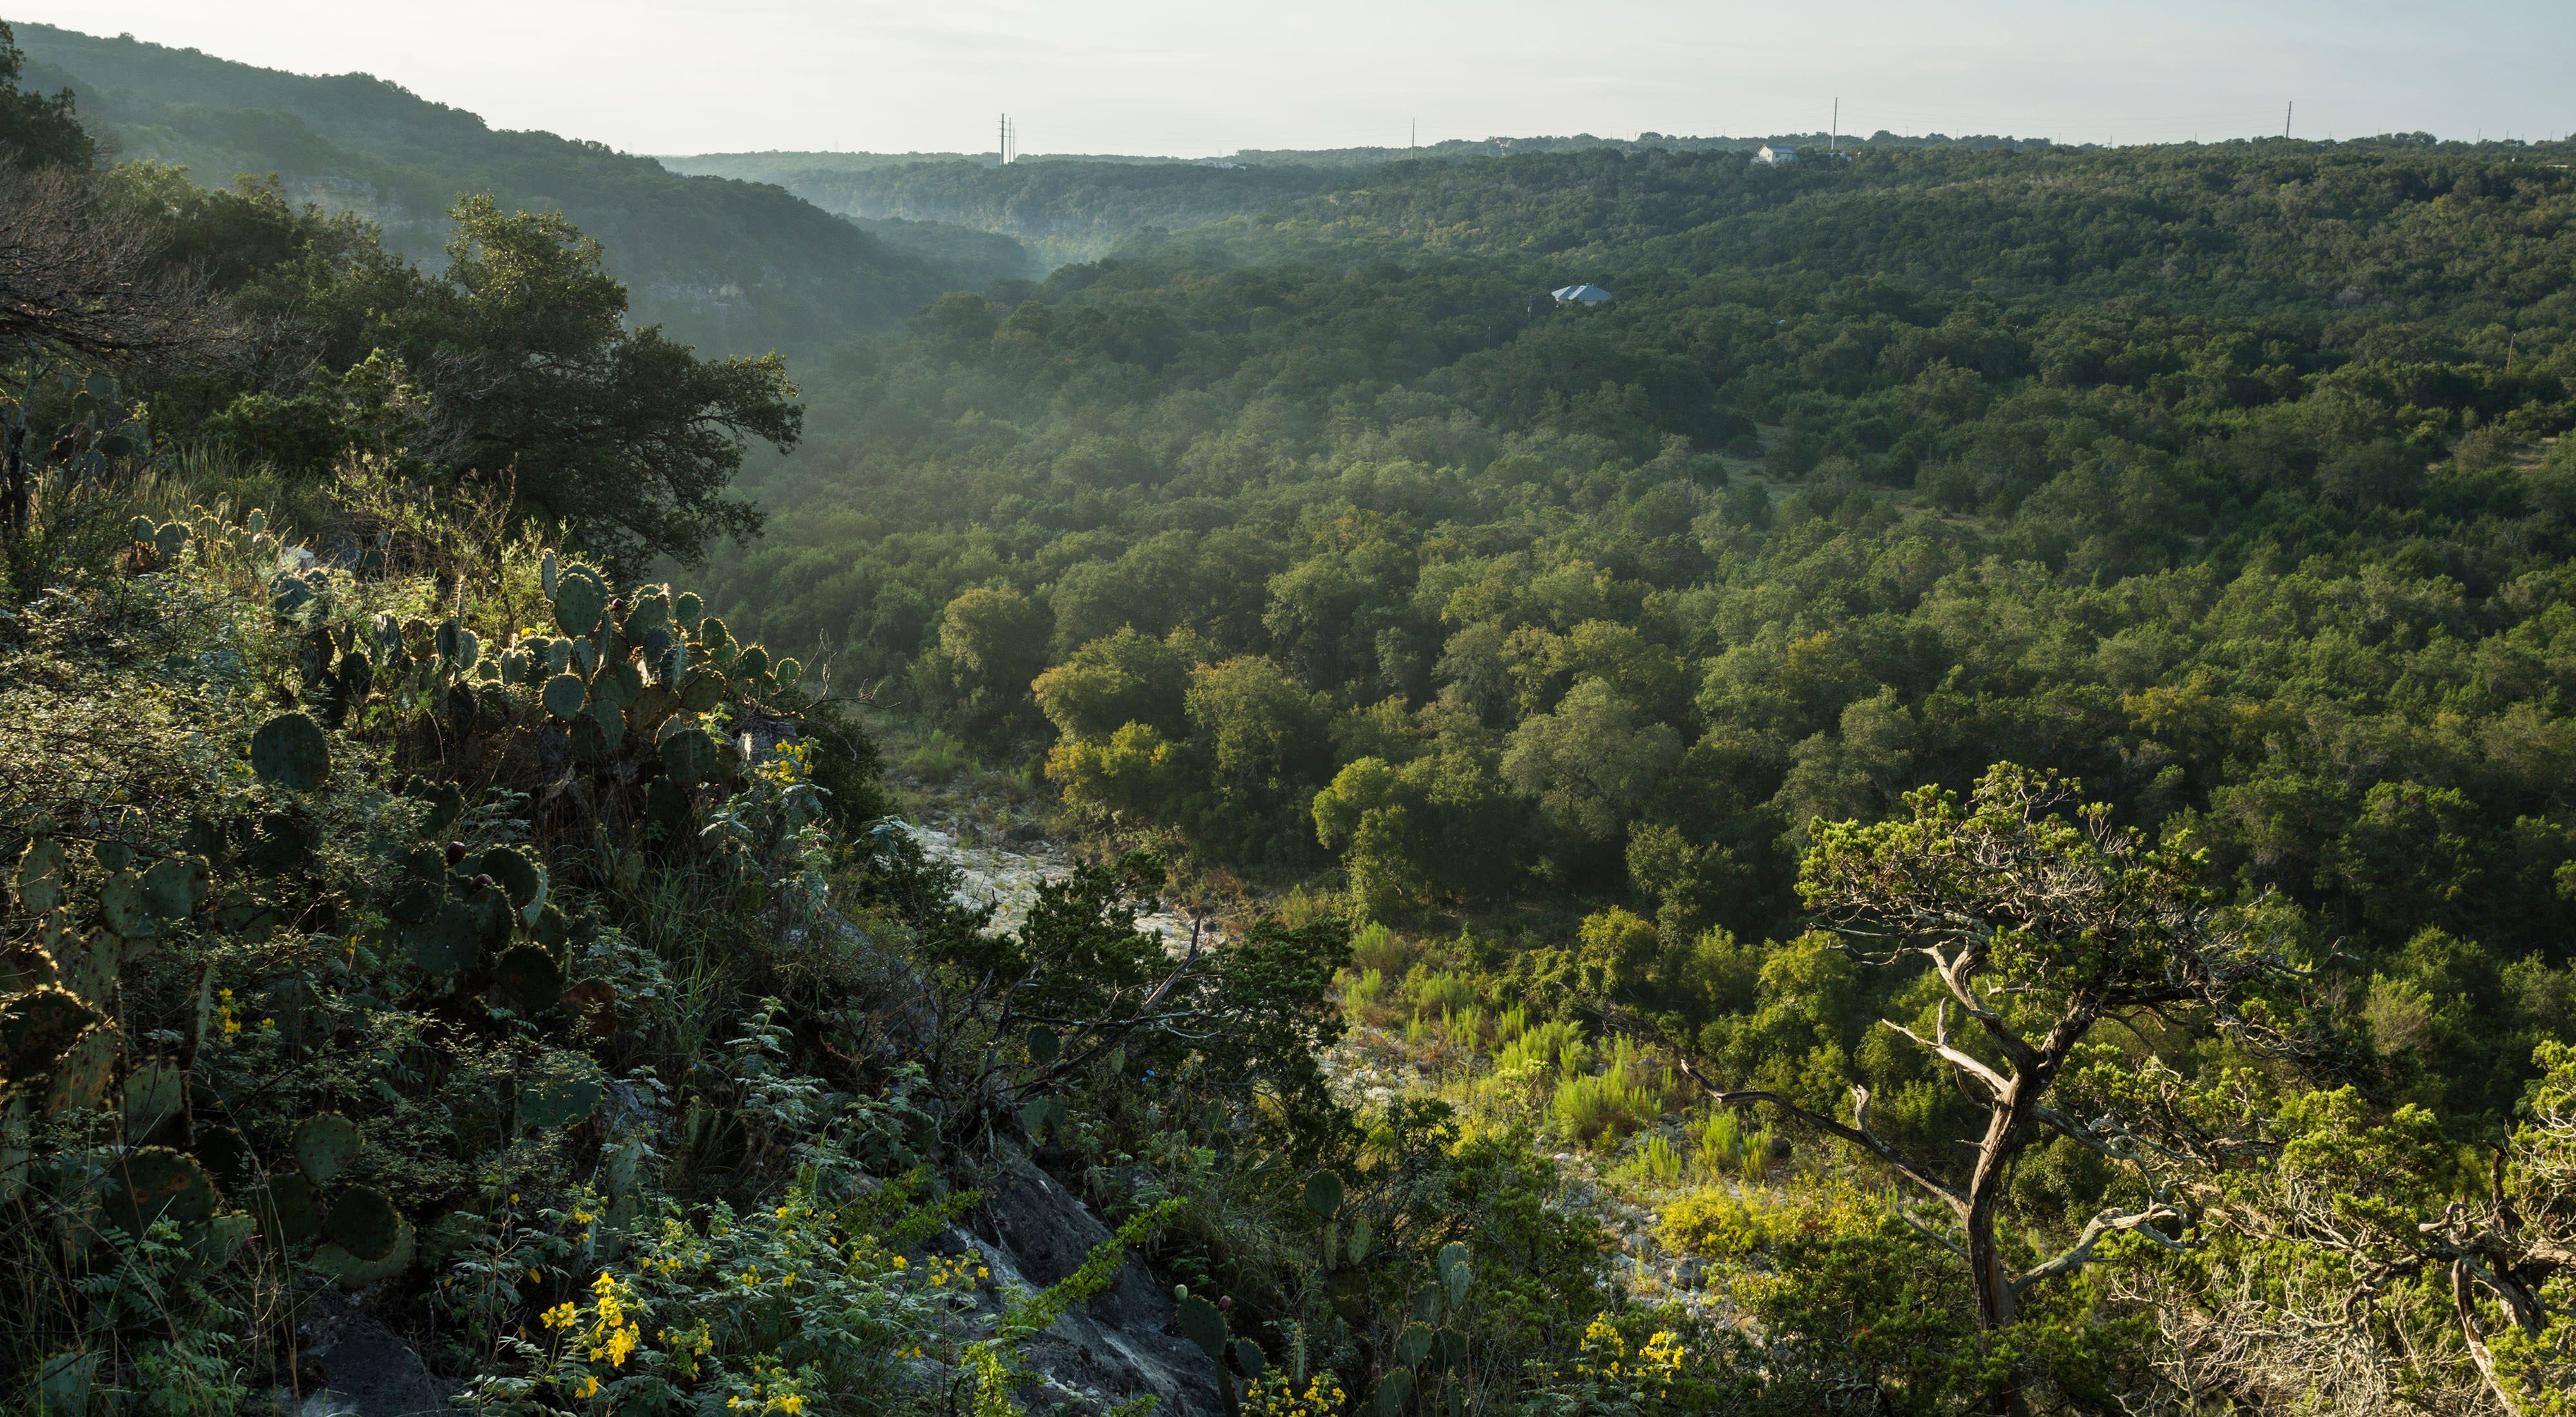 Cibolo Creek gently flows between the rolling, green vistas of the Texas Hill Country, dotted by cactus and shrubs.